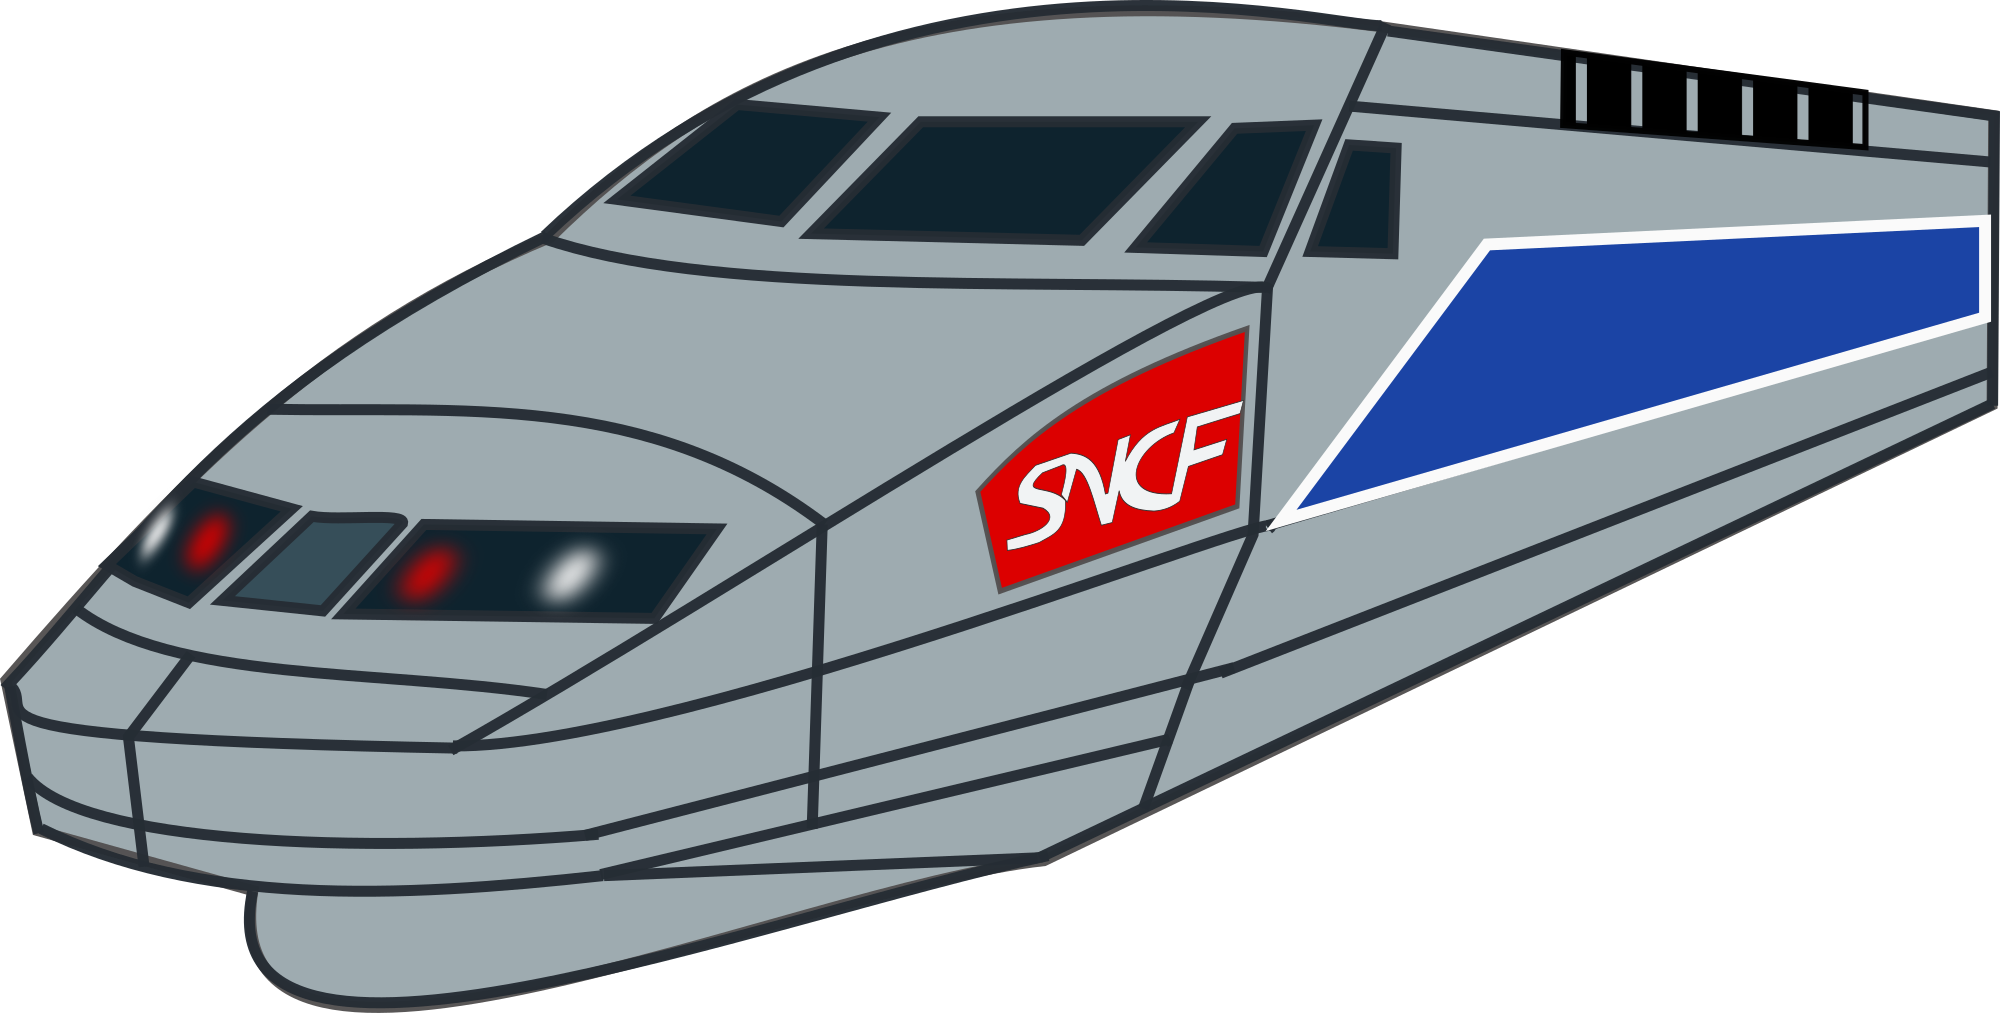 Free Bullet Train Cliparts, Download Free Clip Art, Free.